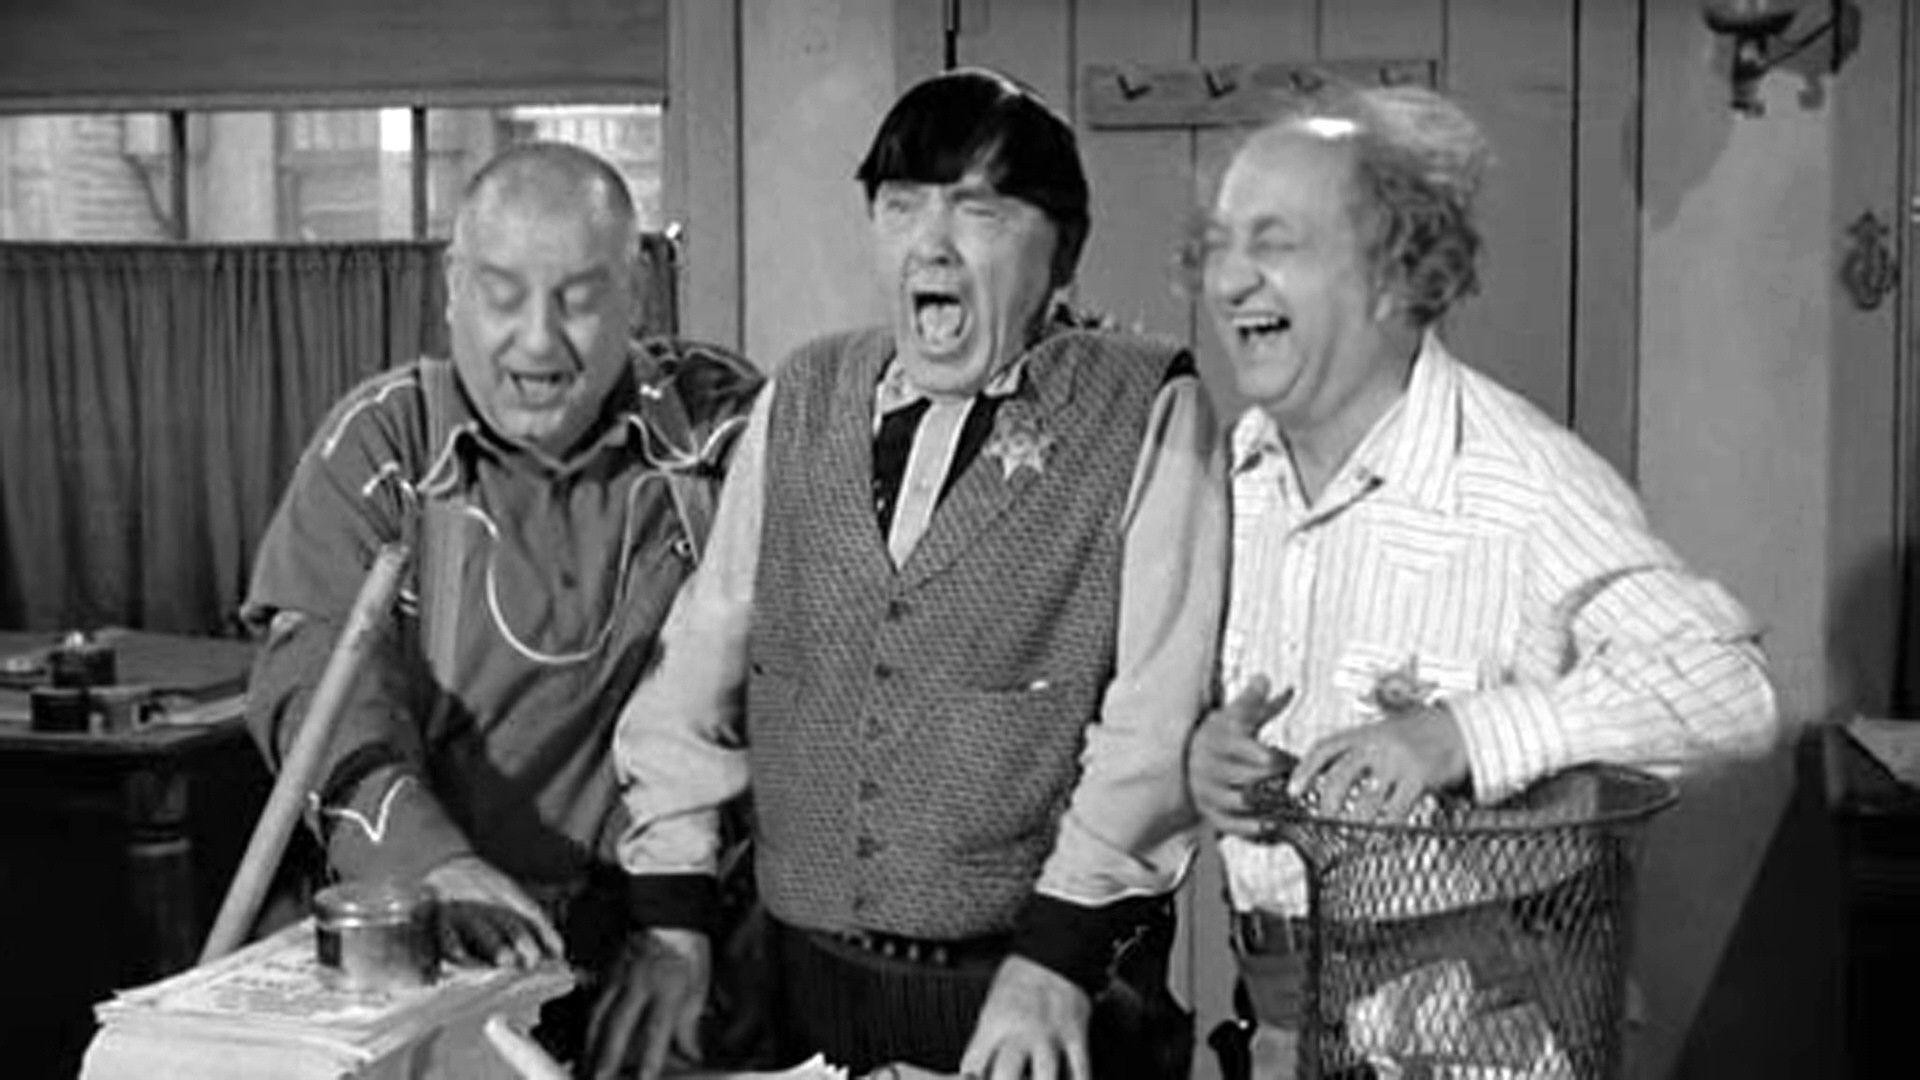 1920x1080 5 The Three Stooges Wallpapers | The Three Stooges Backgrounds